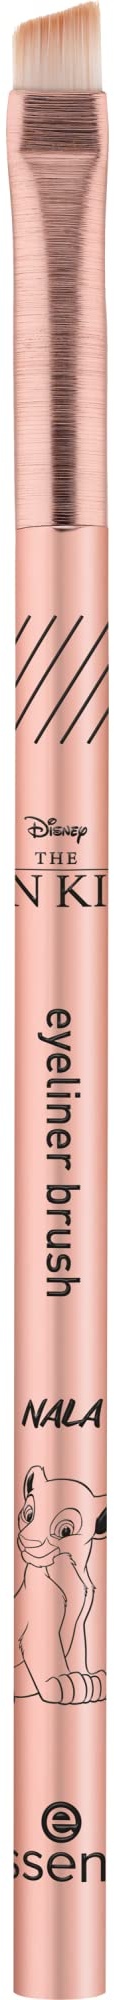 essence | The Lion King Eyeliner Brush with Slanted Tip | Limited Edition | For Precise Application of Liner & Eyeshadow | Soft Synthetic Bristles | Vegan & Cruelty Free Make Up Tool